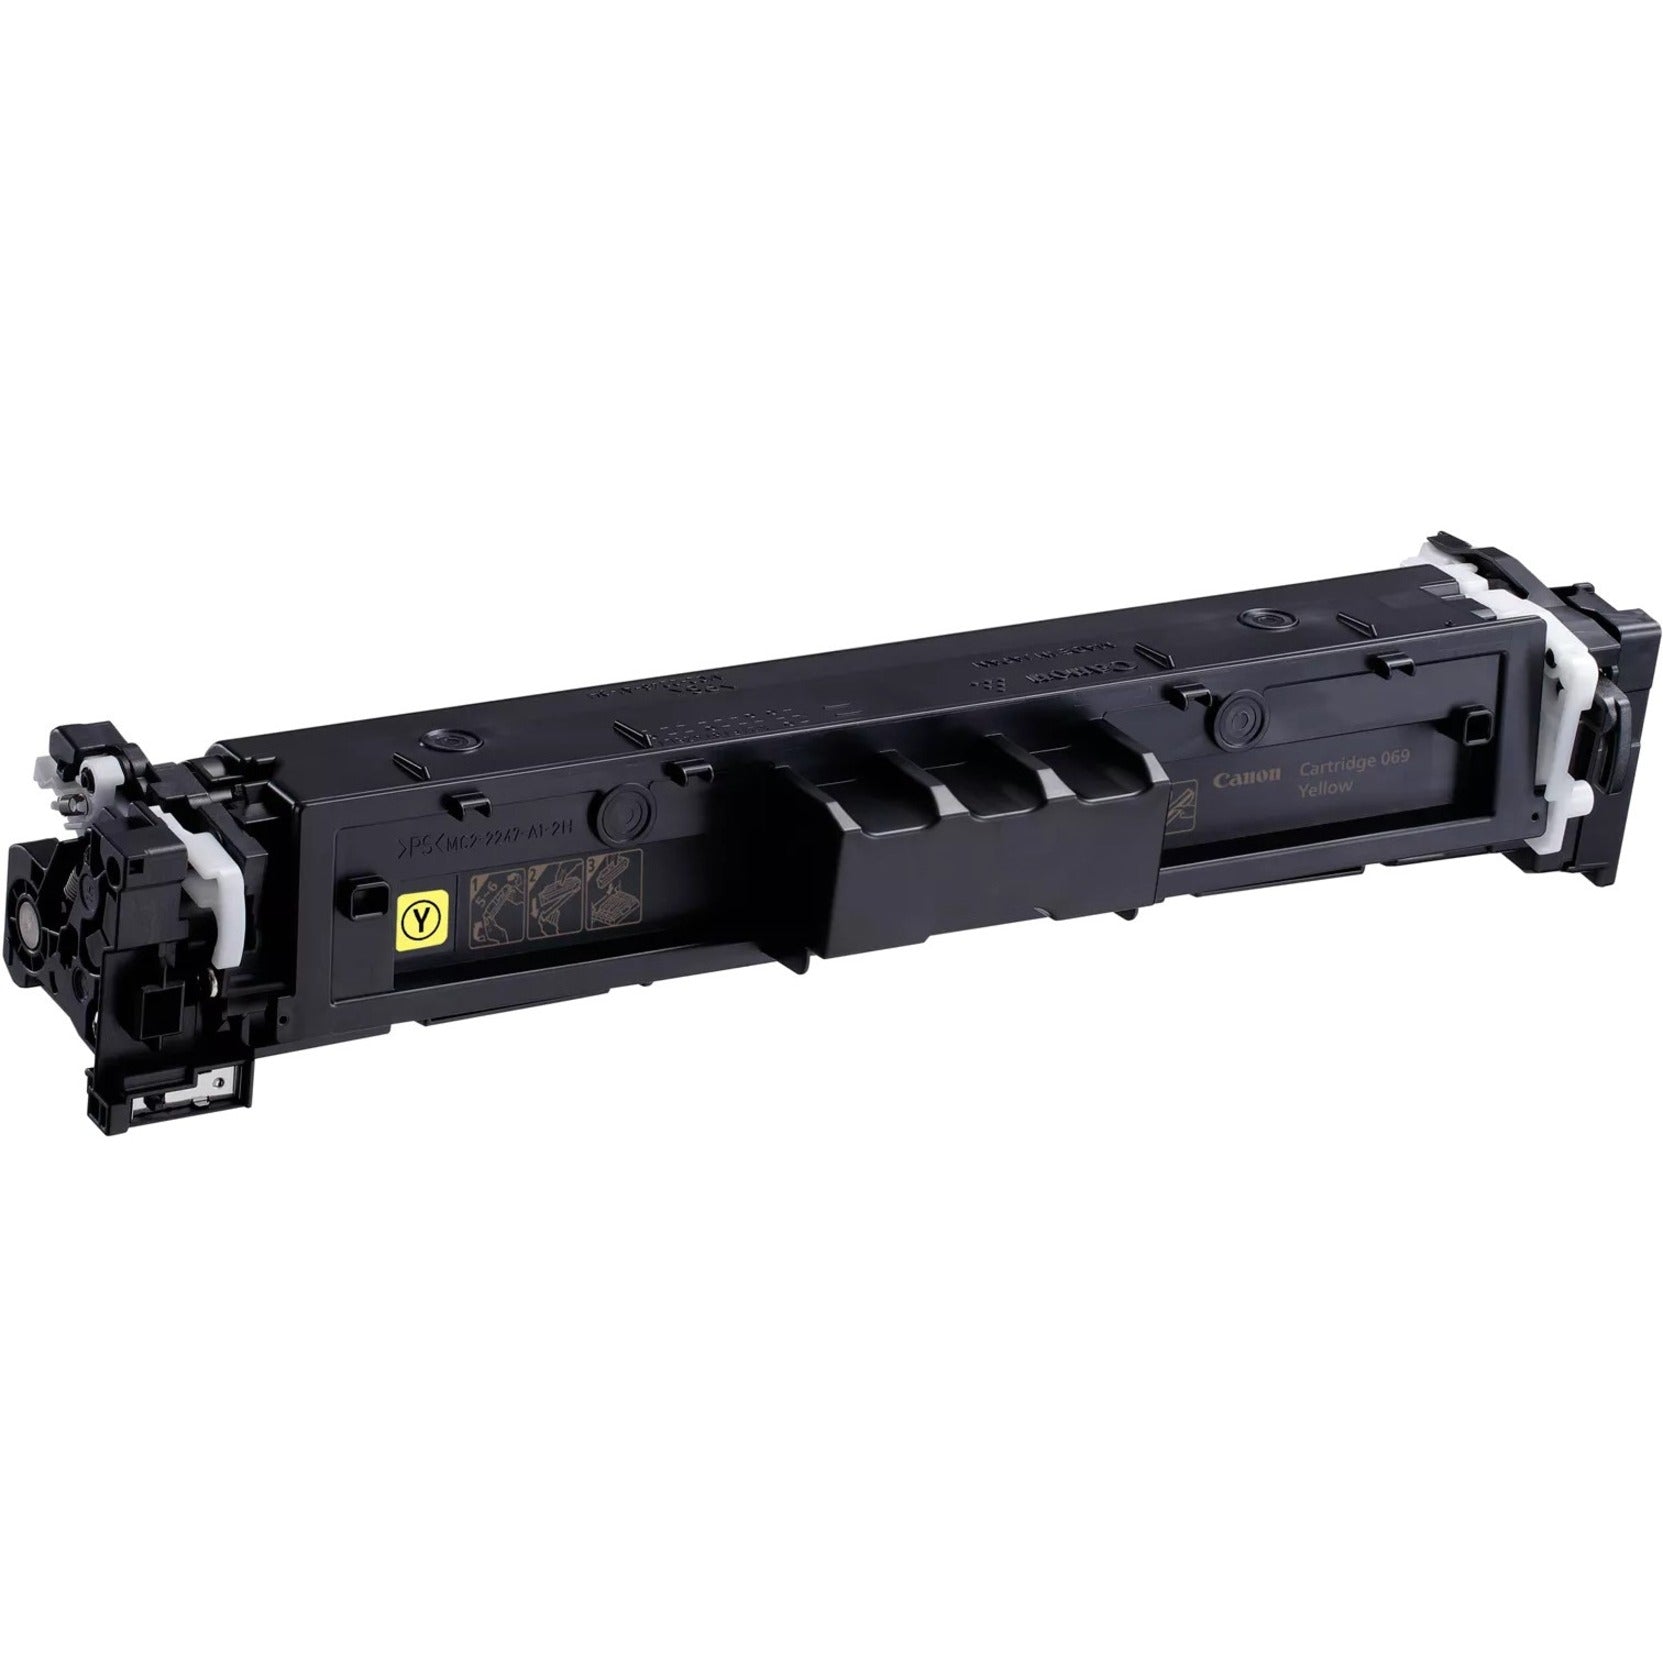 Canon 5091C001 069 Toner Cartridge, Yellow, 1900 Pages